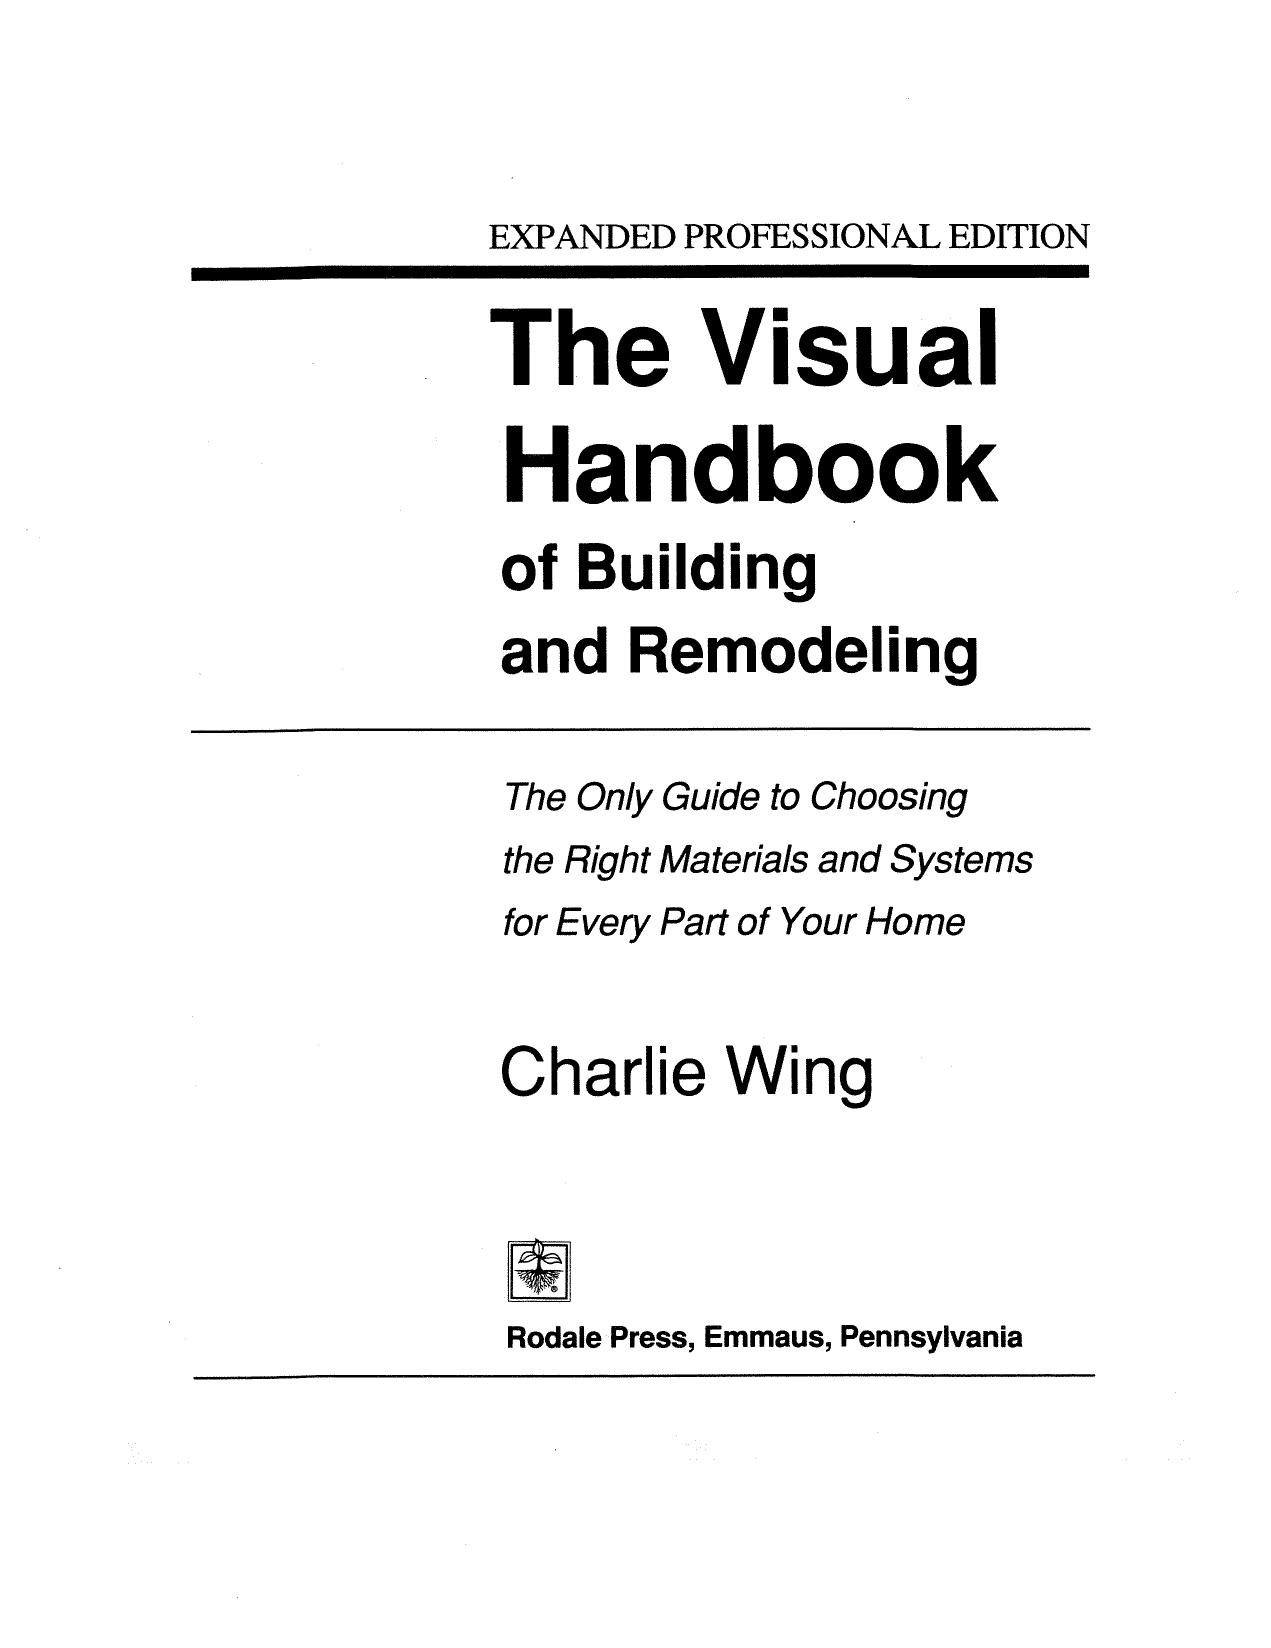 The Visual Handbook of Building and Remodeling by Charlie Wing